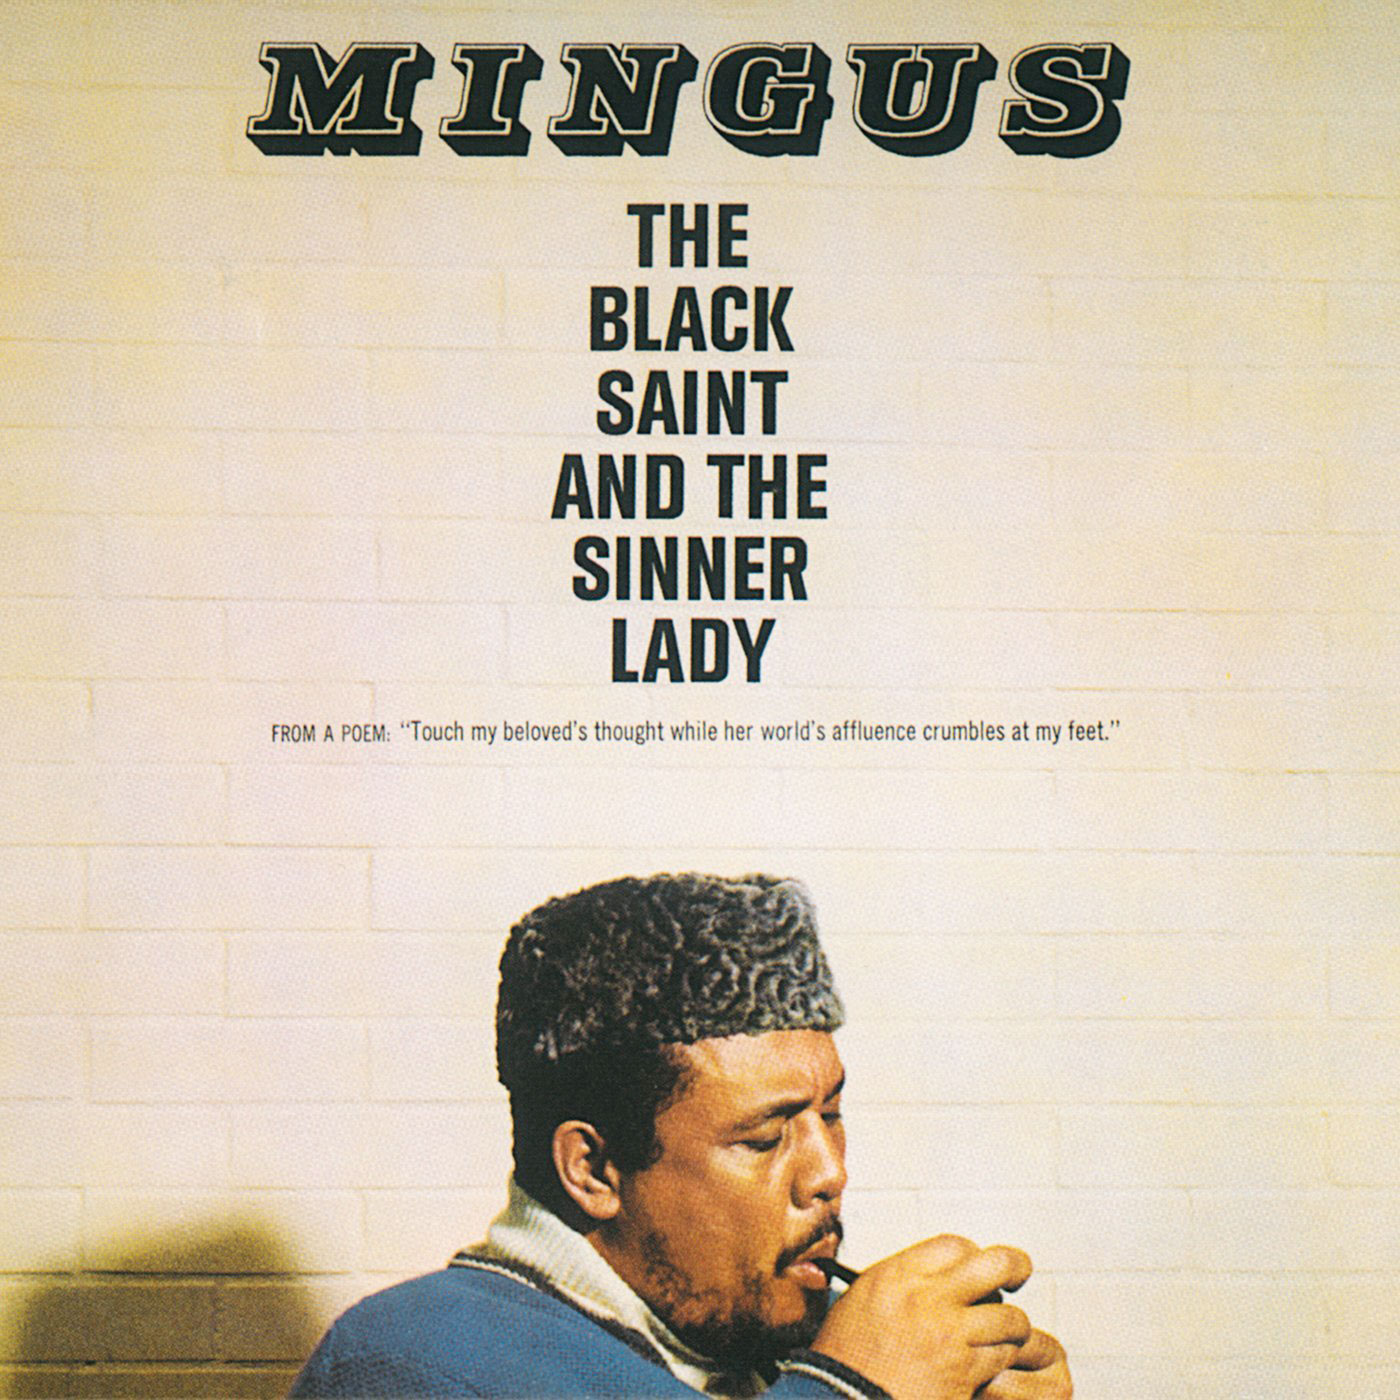 039 Charles Mingus – The Black Saint and the Sinner Lady